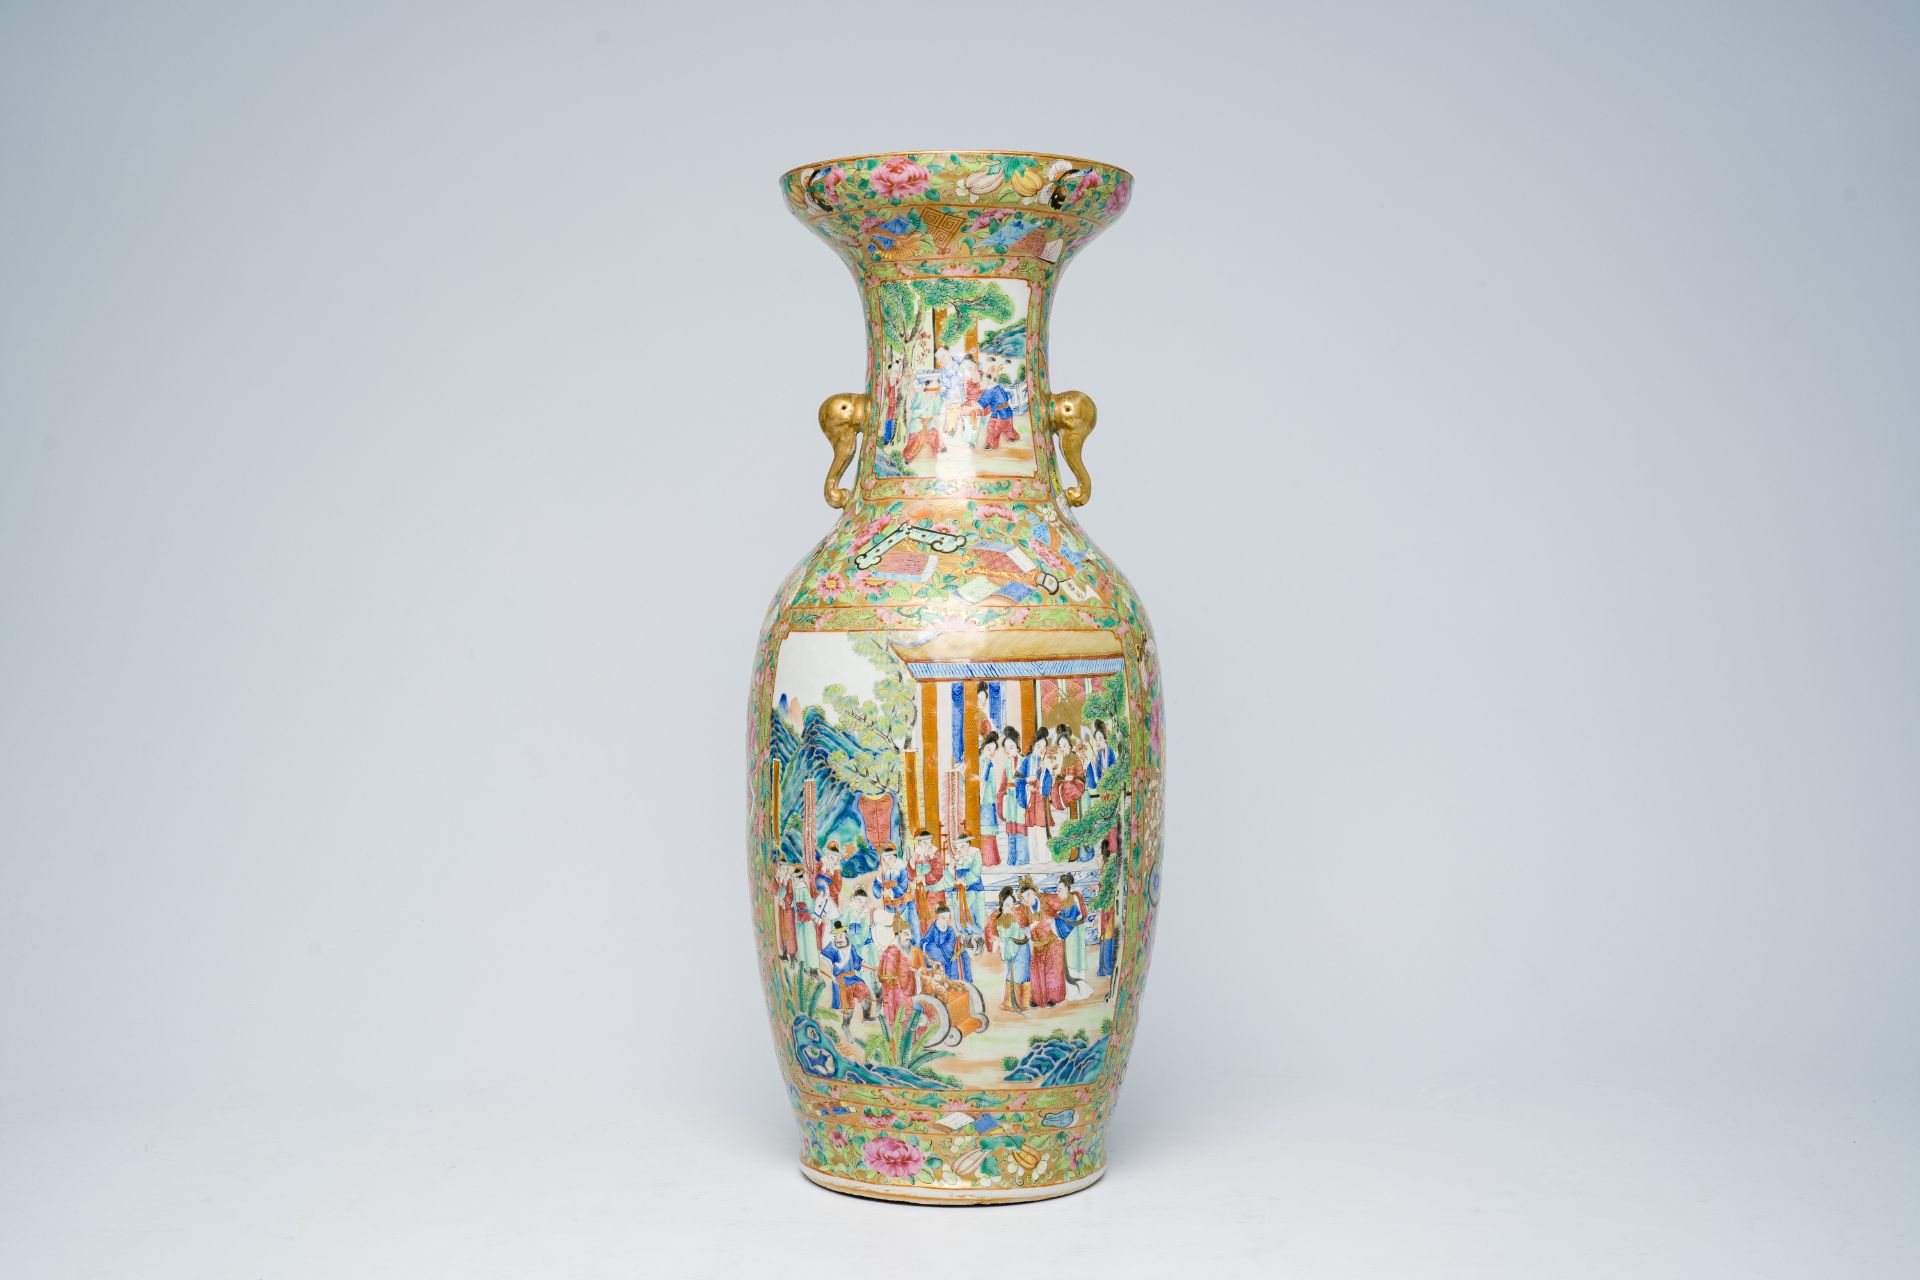 A Chinese Canton famille rose vase with palace scenes, antiquities and floral design, 19th C.